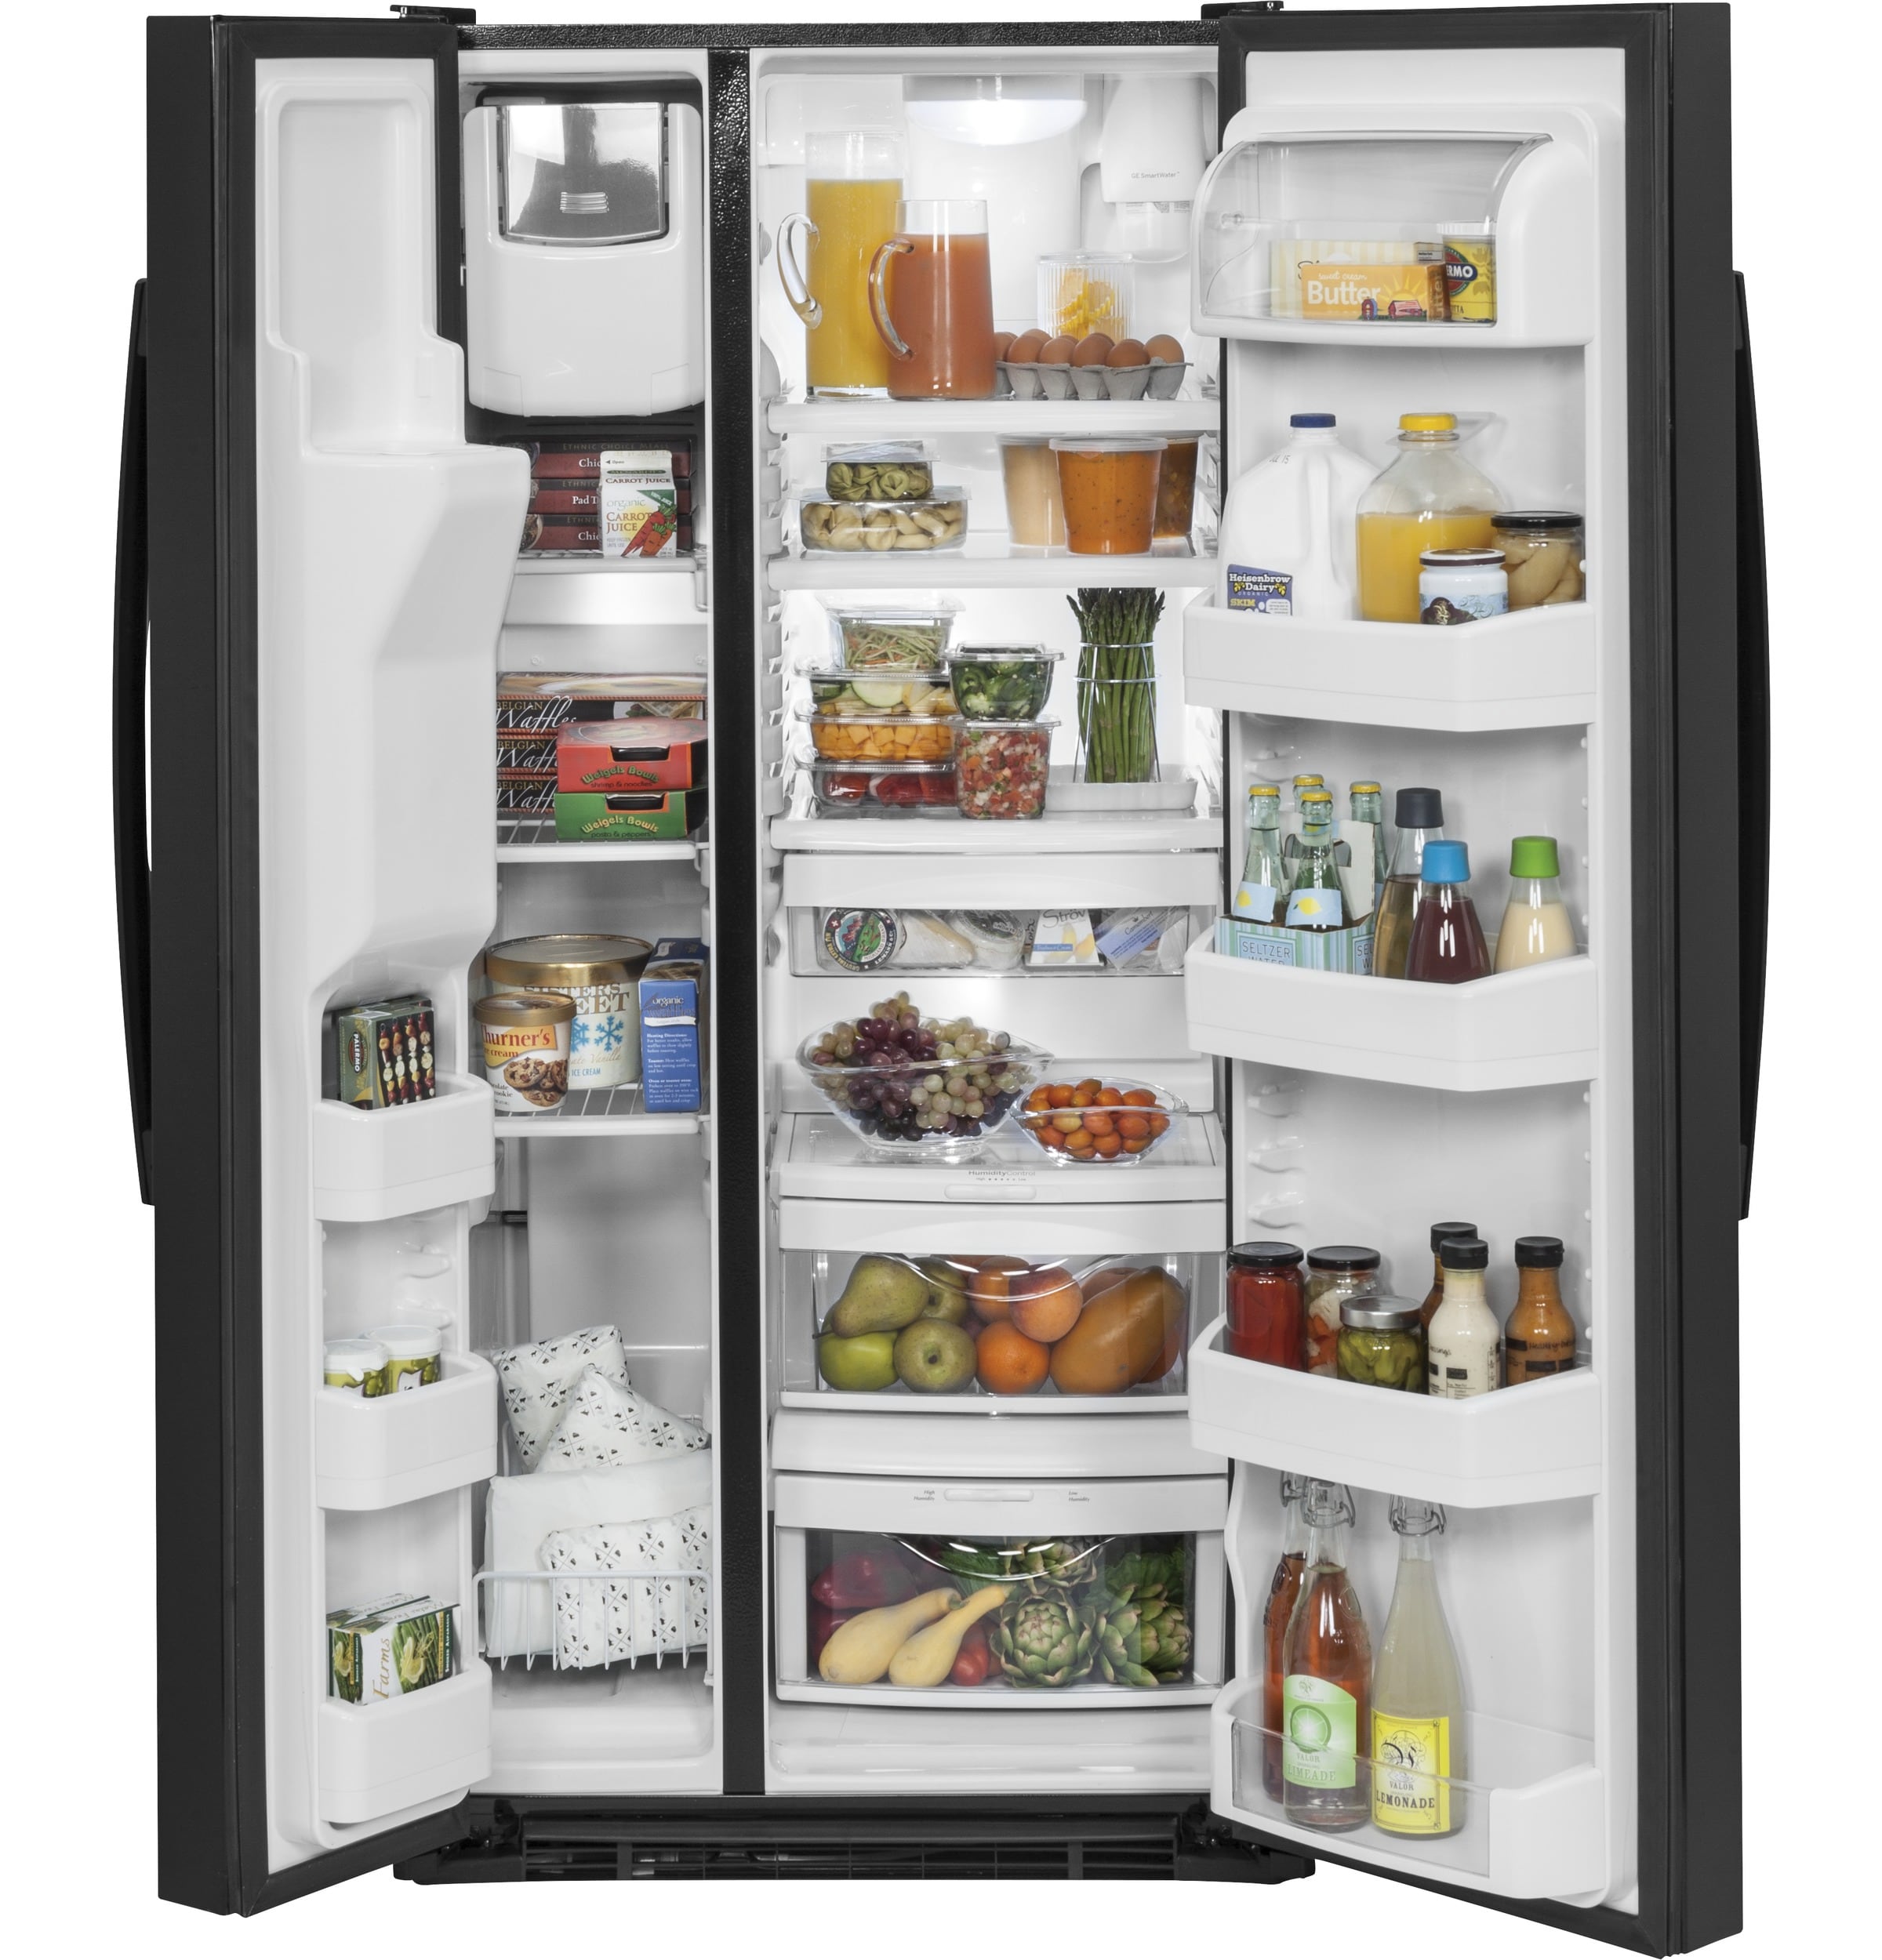 GE 23.2-cu ft Side-by-Side Refrigerator with Ice Maker (High-gloss ...